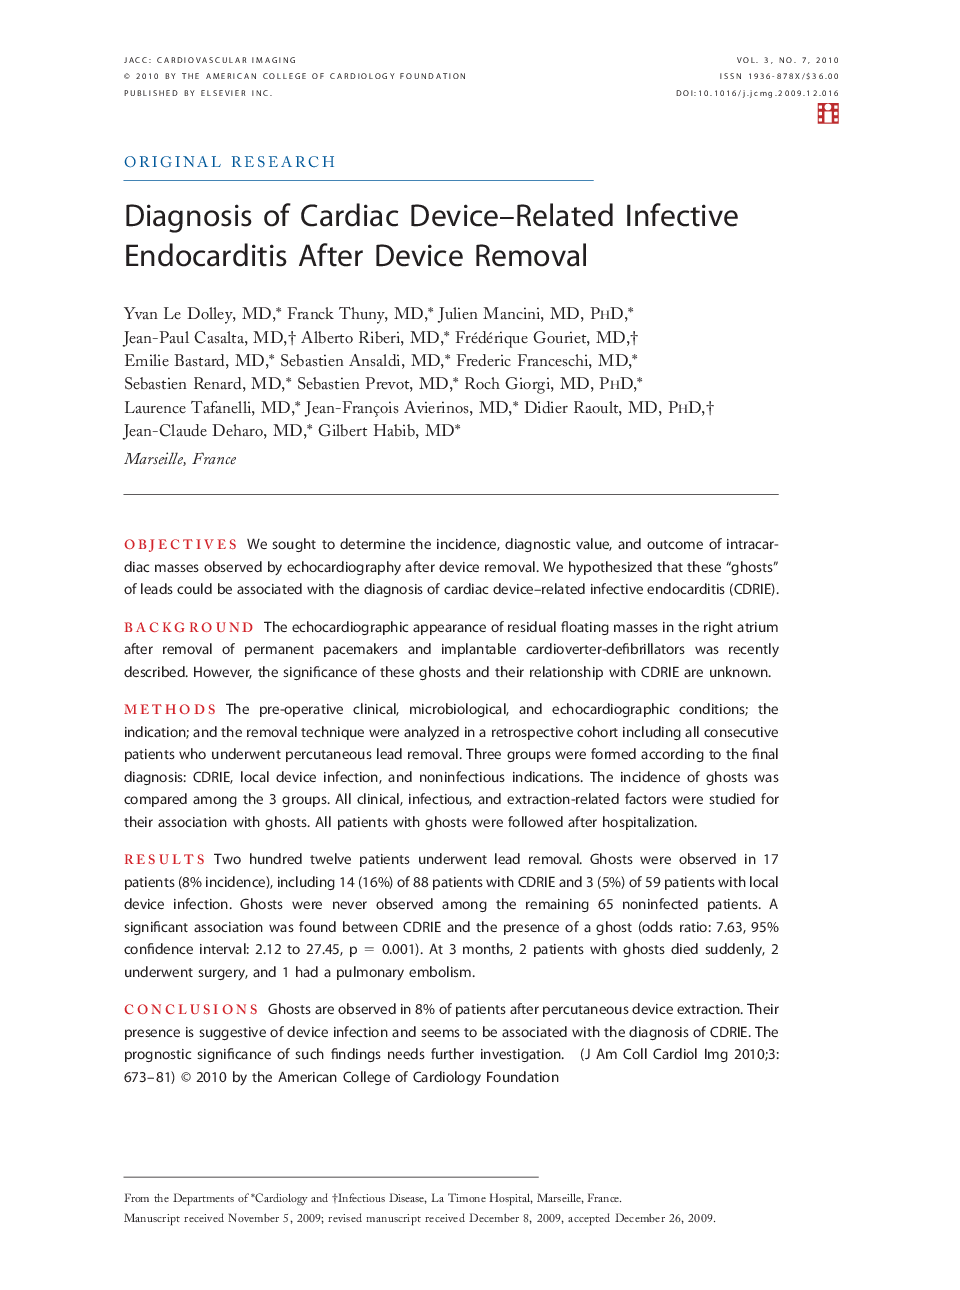 Diagnosis of Cardiac Device–Related Infective Endocarditis After Device Removal